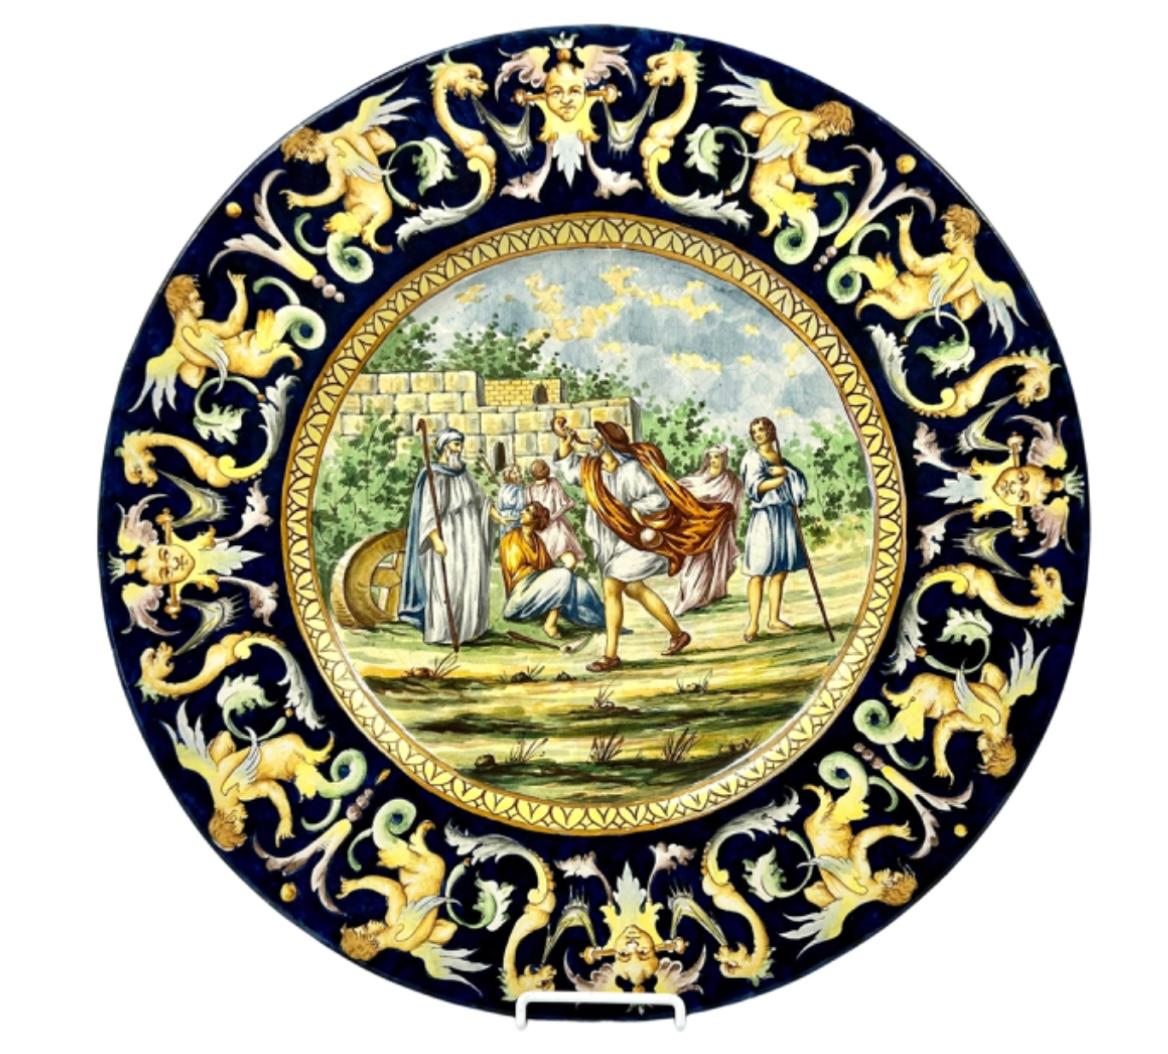 Large 19th century Italian Majolica charger in the Renaissance style. Charger has faces, dragons, and angels on wide cobalt border. Center of charger depicts an Italian village scene in hues of gold, light blue, rust, and green. Marked on reverse